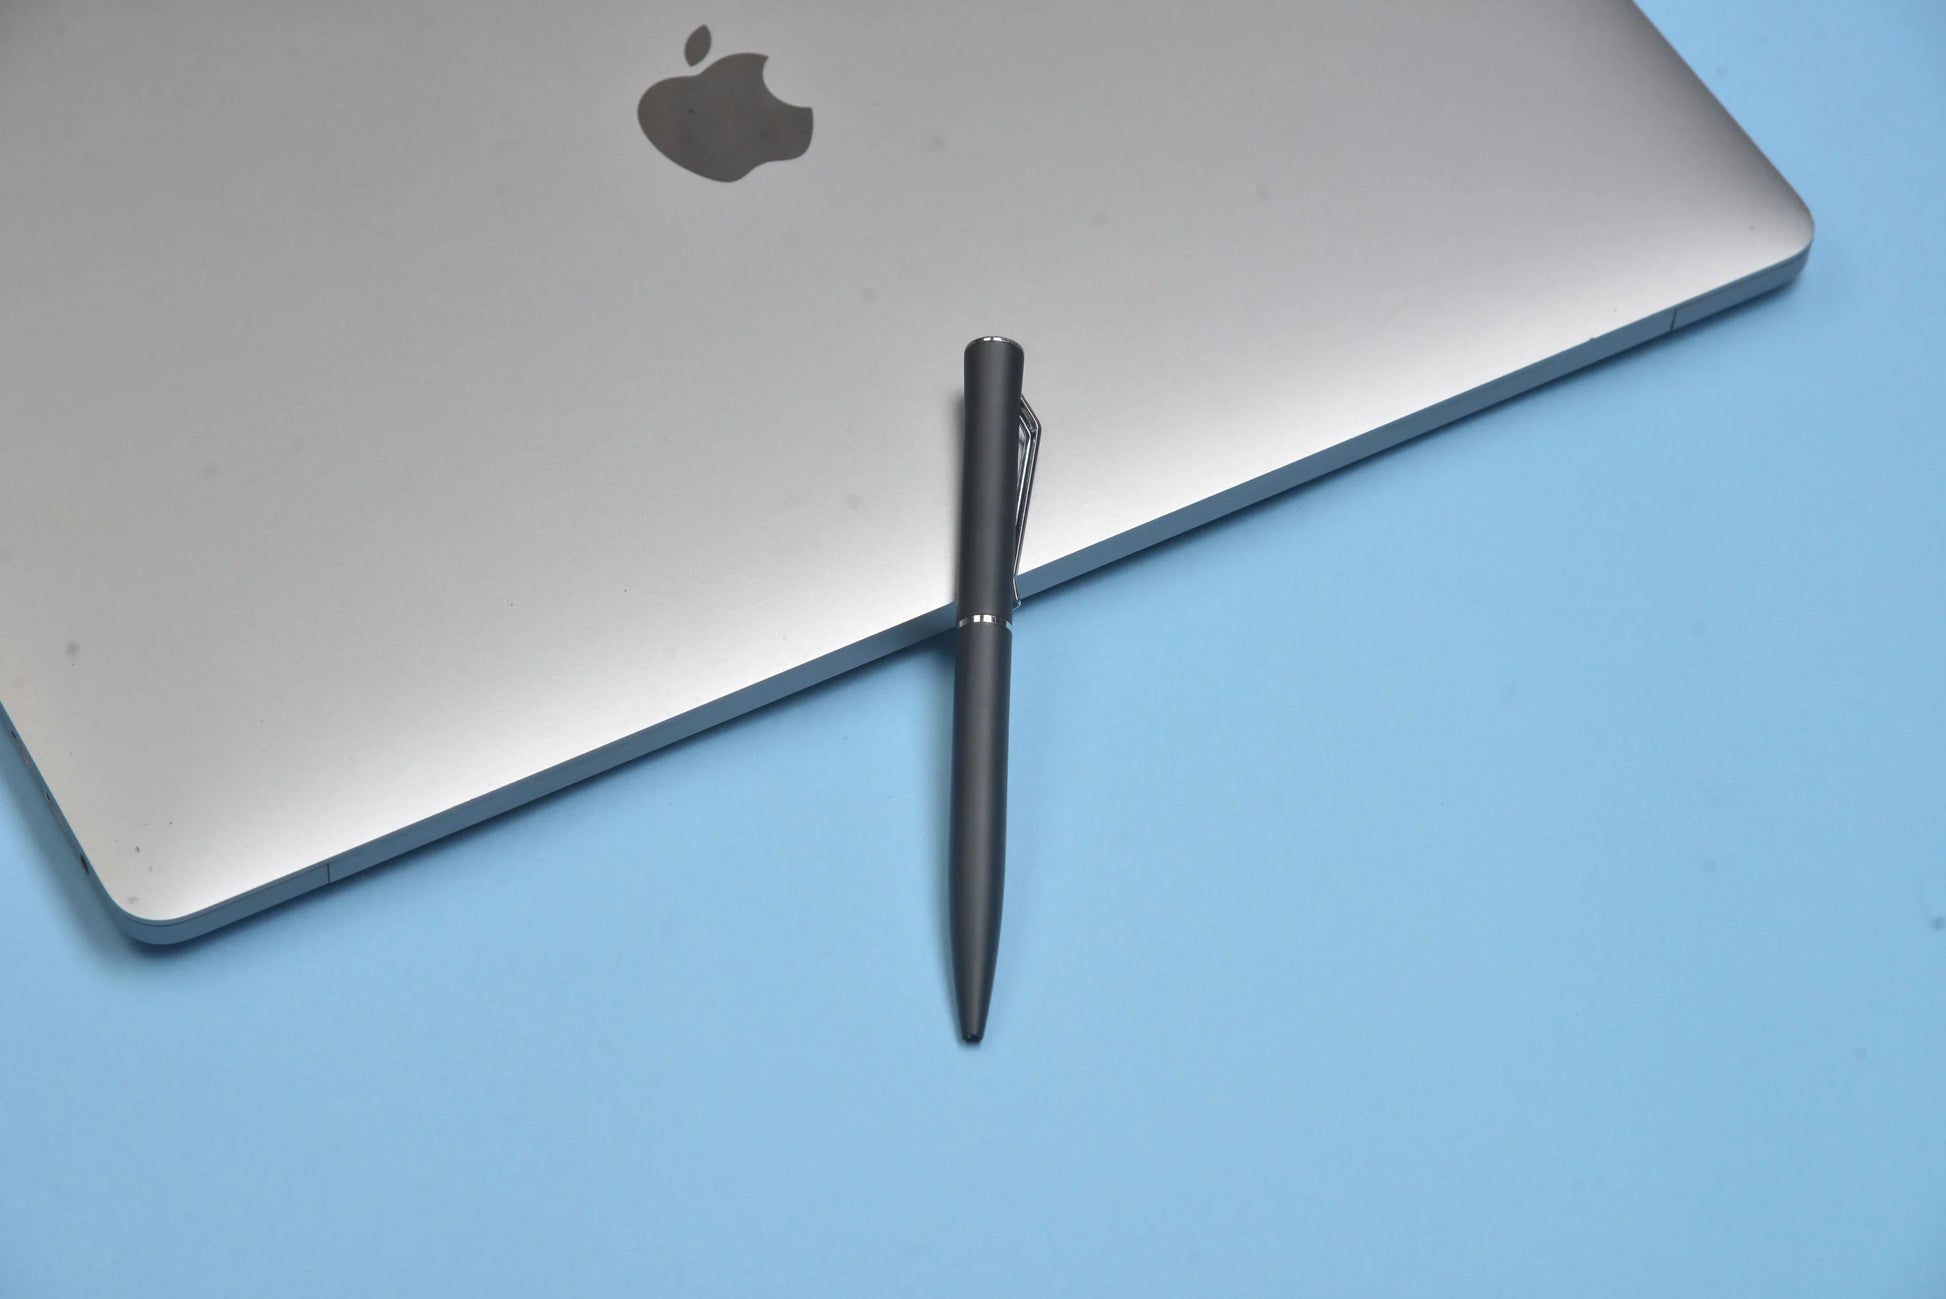 Crafted from high-quality materials, our pen is designed to last. The smooth, refillable ballpoint and comfortable grip make it a pleasure to write with, while the classic design makes it a timeless addition to your desk.